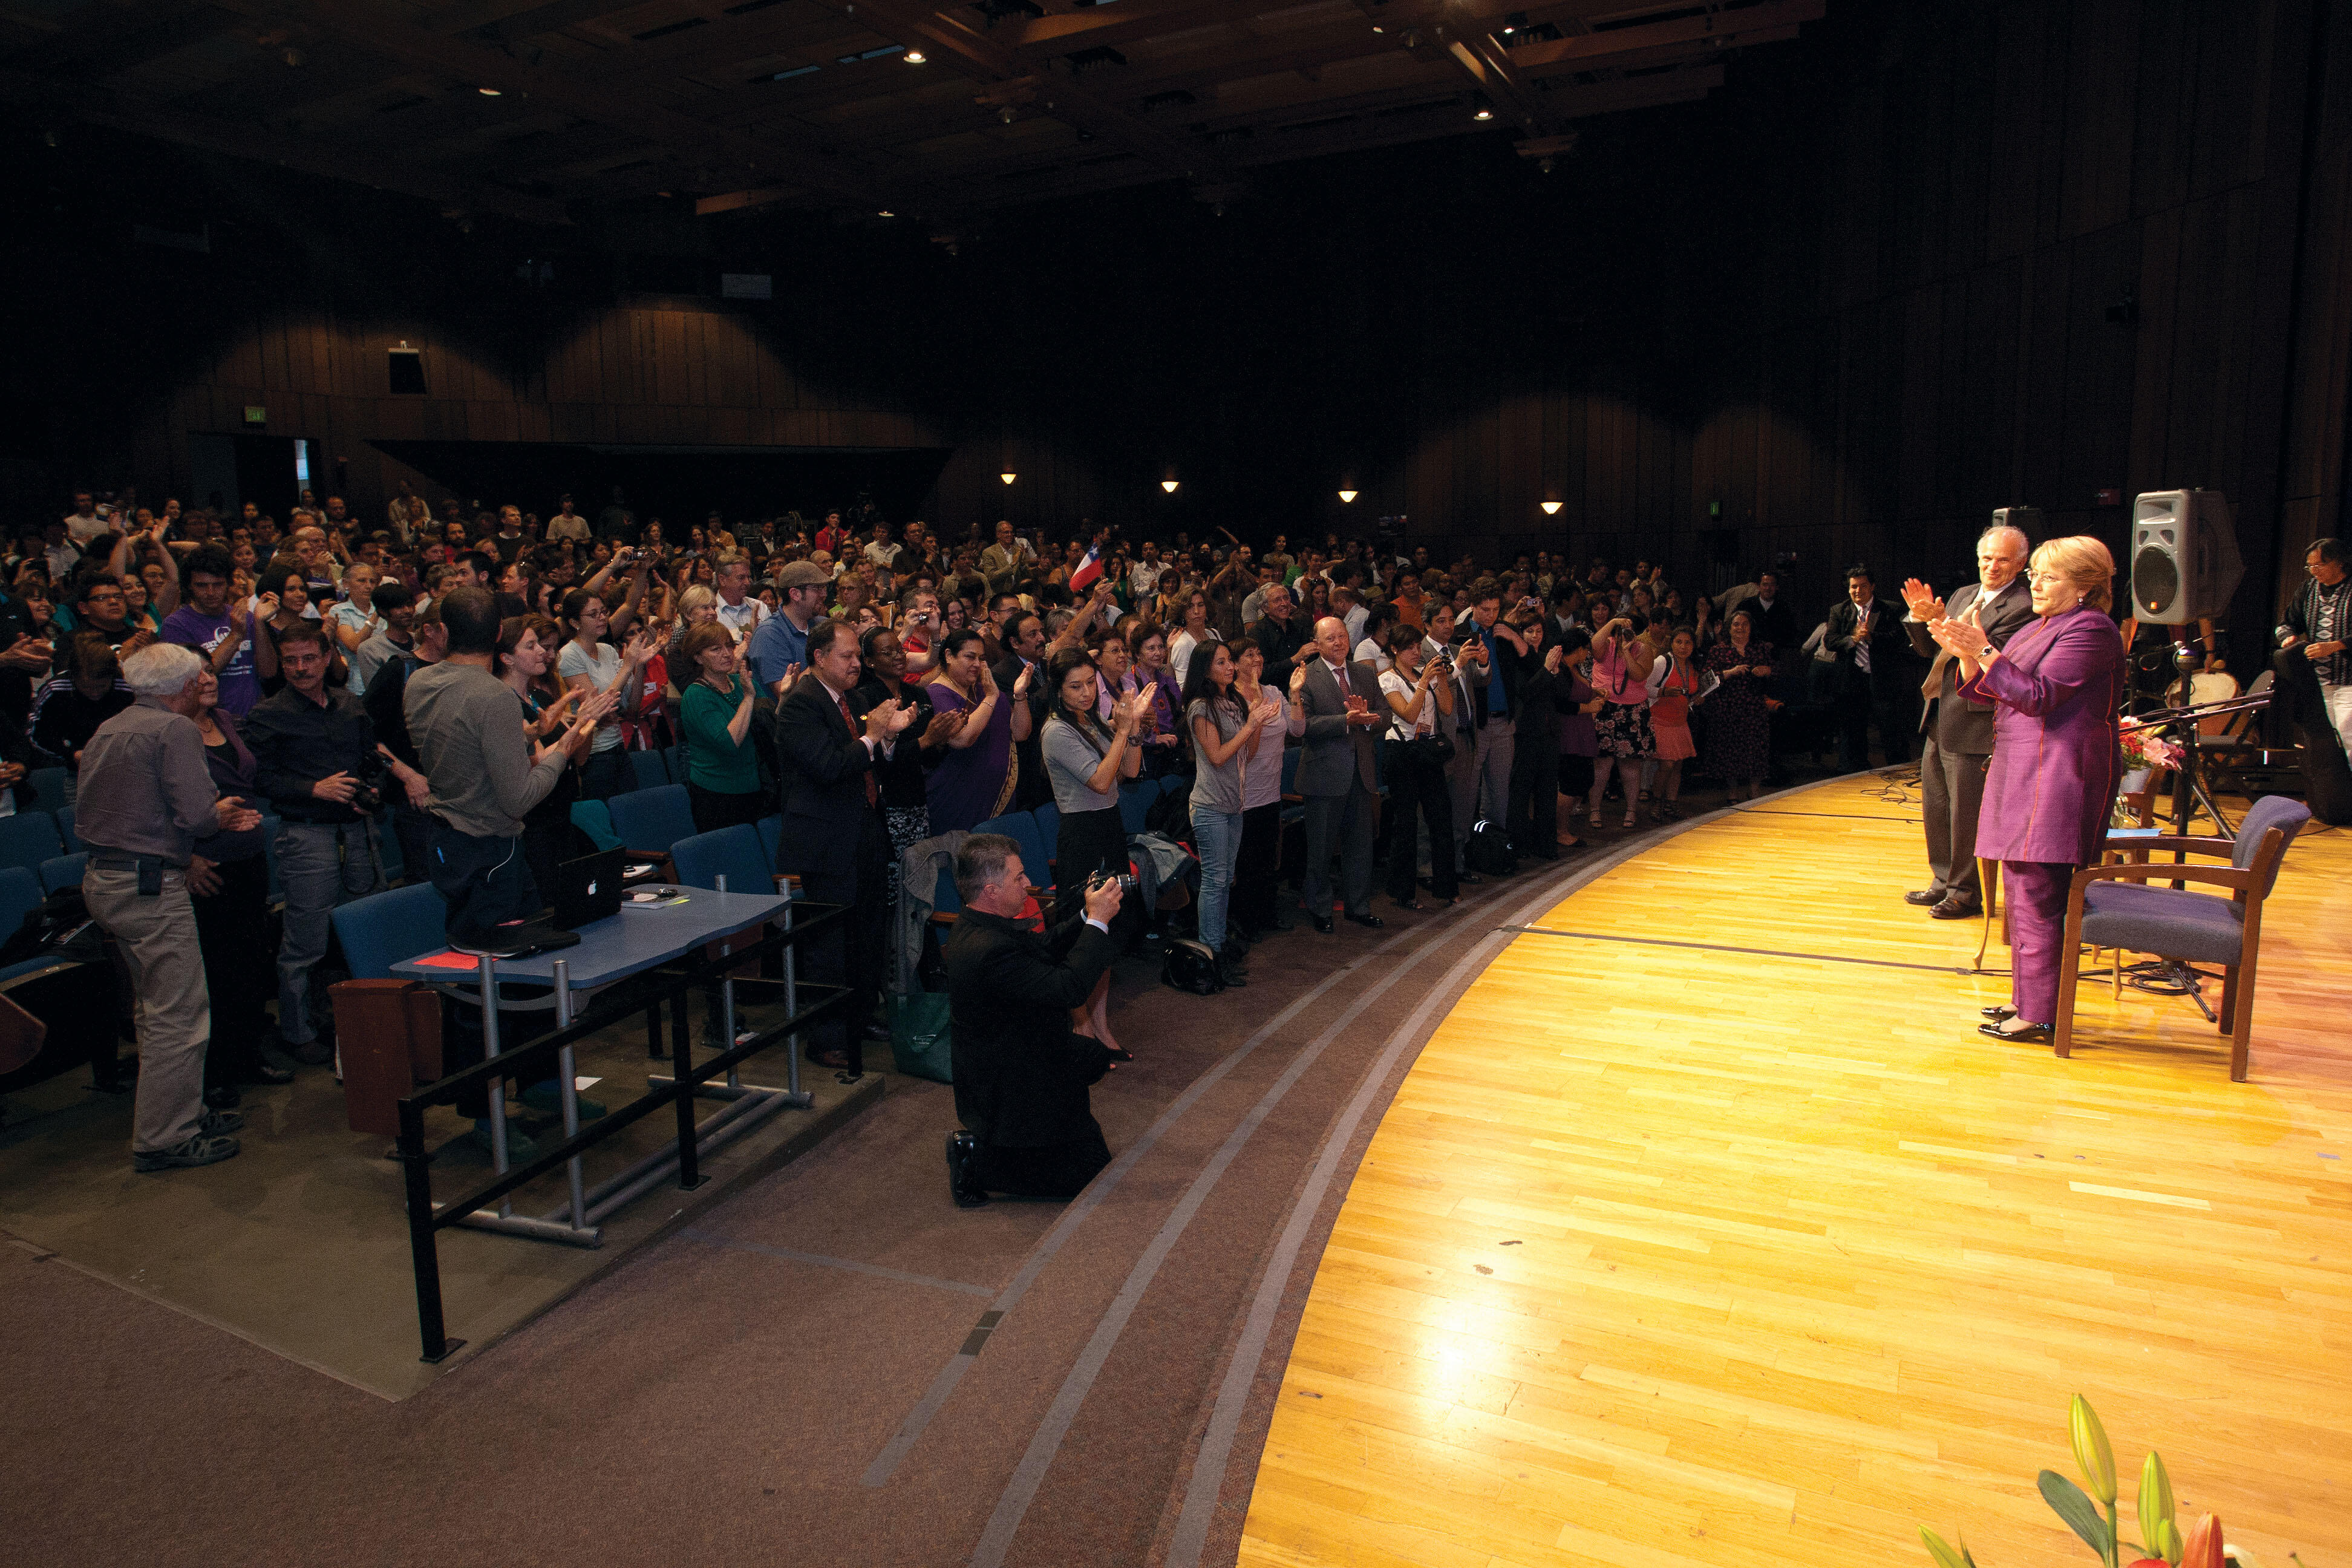 Michelle Bachelet responds to a standing ovation from the audience during her public talk. (Photo by Jim Block.)